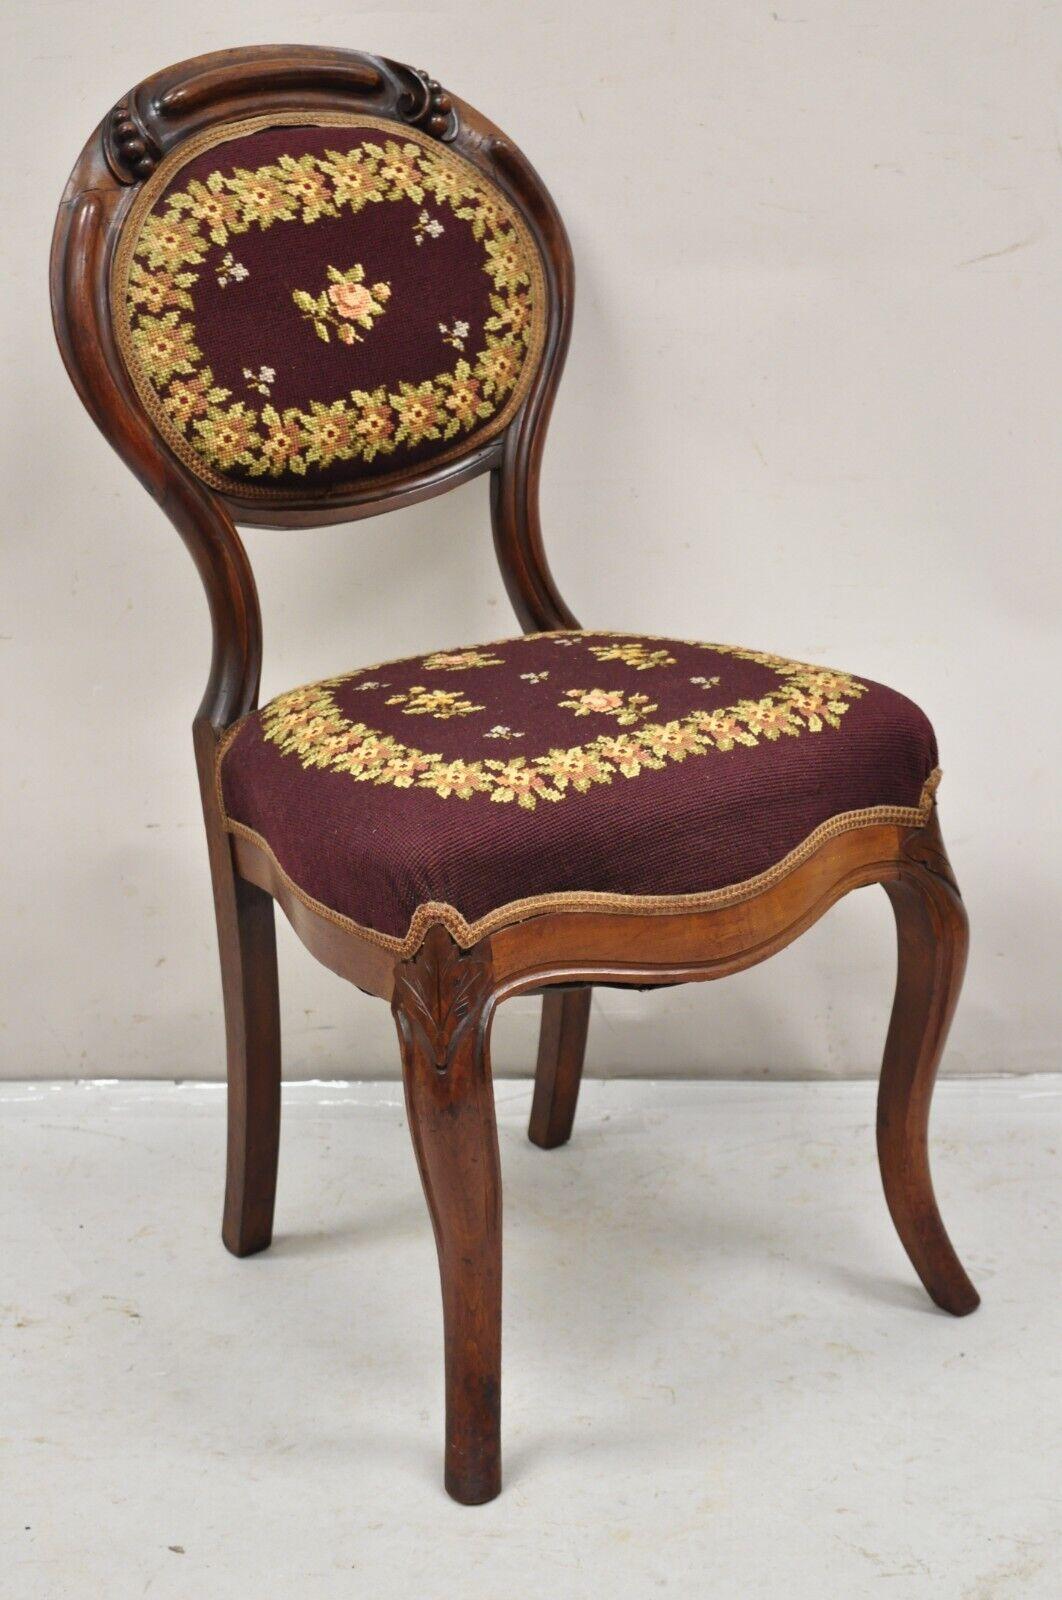 Antique Victorian Burgundy Floral Needlepoint Carved Mahogany Balloon Back Side Chair. Circa 19th Century. Measurements: 36